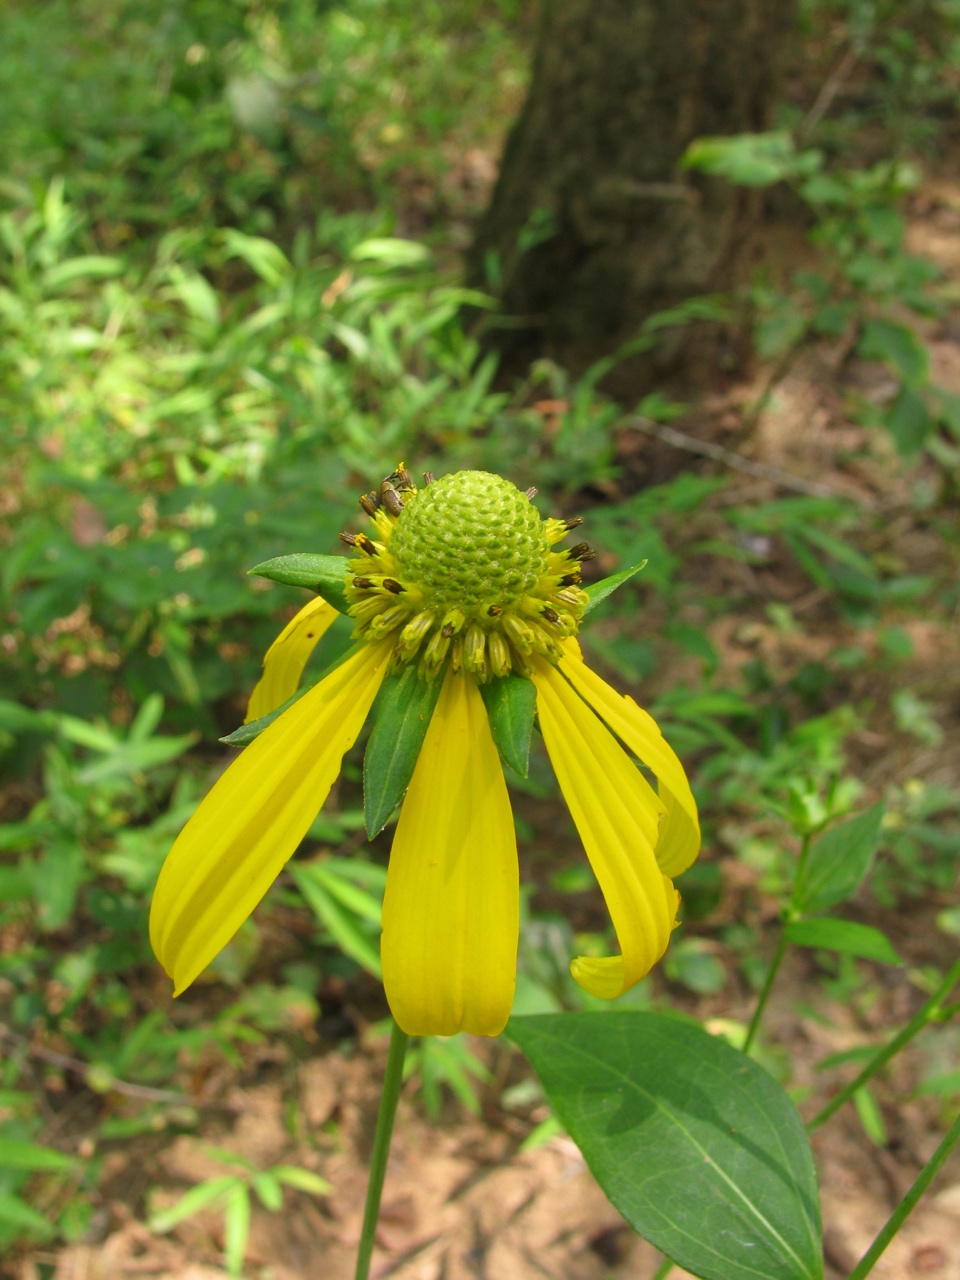 The Scientific Name is Rudbeckia laciniata. You will likely hear them called Cutleaf Coneflower, Goldenglow, Green-headed Coneflower, Sochan. This picture shows the Close-up of flower showing dome-shaped green disk of Rudbeckia laciniata